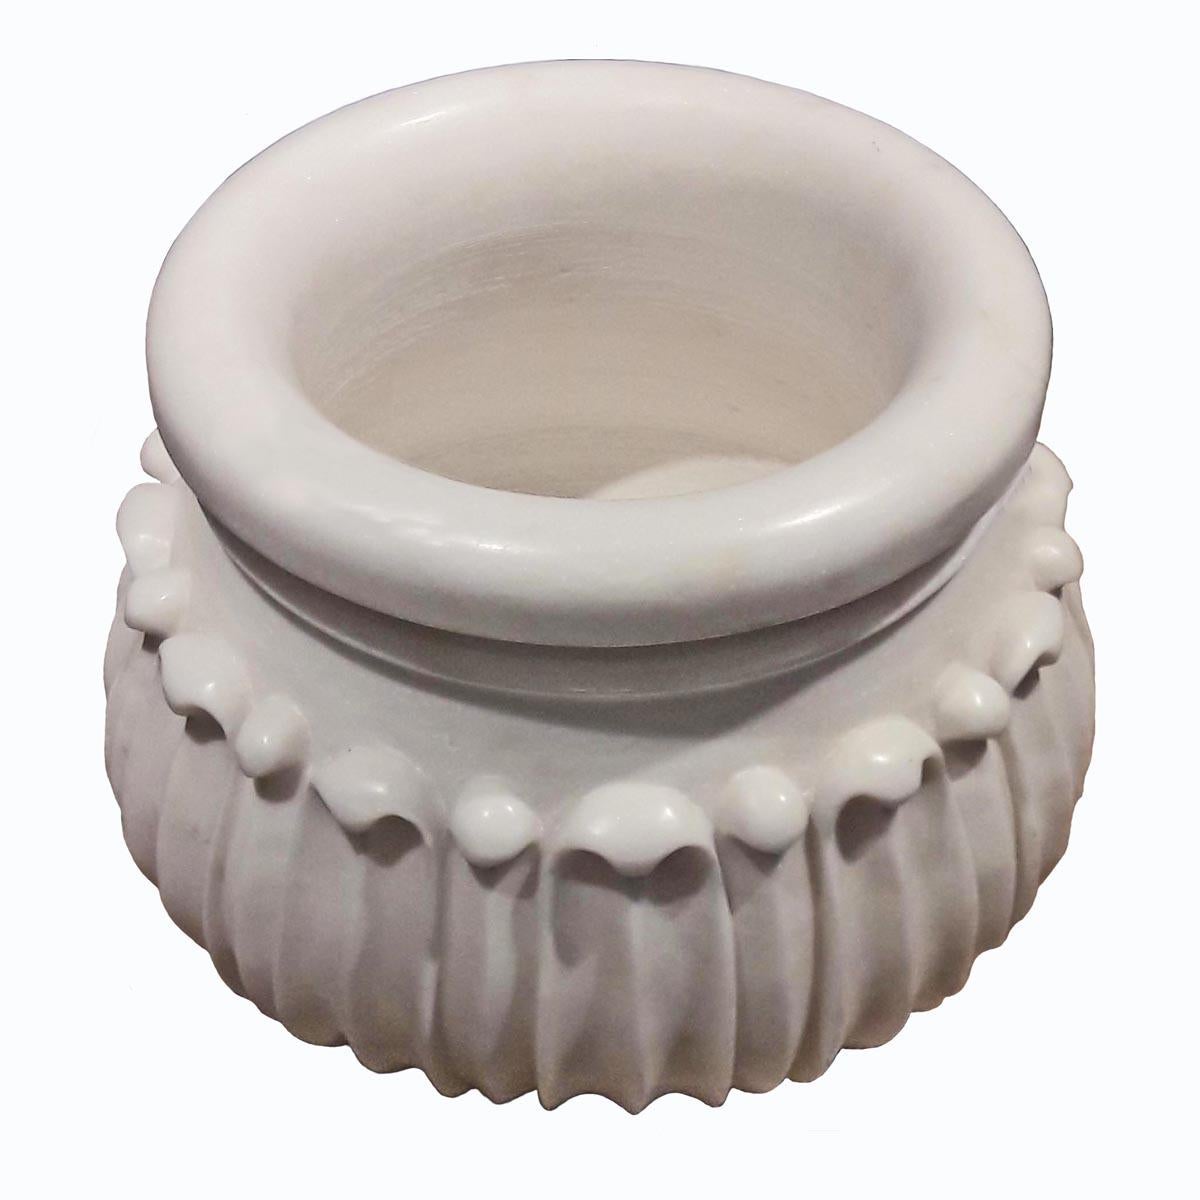 Large white marble planter / cachepot / jardinière from India. A stylish, hand-carved vessel which will add a touch of serene elegance to any terrace, patio or veranda, or any indoor ambient. 

Two available. Sold separately.